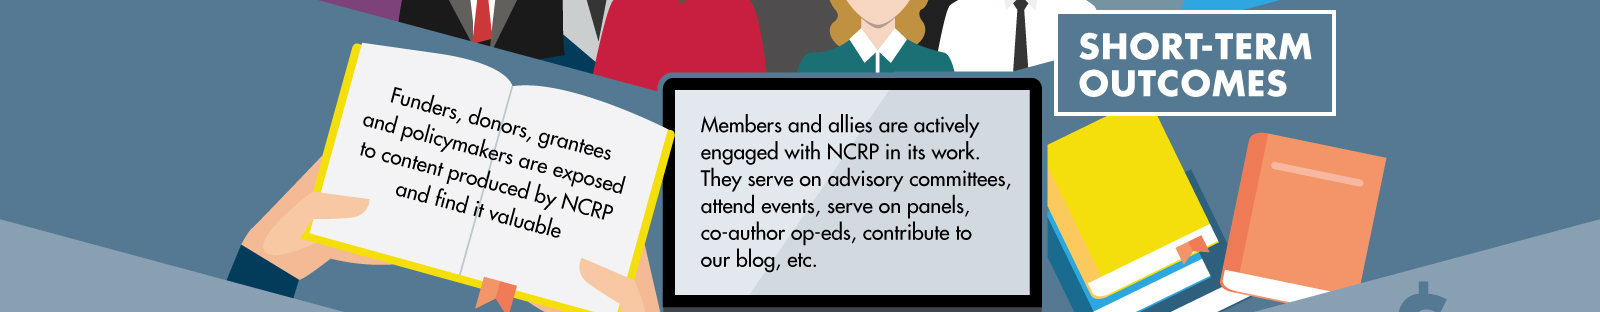 Our desired short-term outcomes are two-fold. First, funders, donors, grantees and policymakers are exposed to content produced by NCRP and find it valuable. Second, members and allies are actively engaged with NCRP in its work. They serve on advisory committees, attend events, serve on panels co-author op-eds, contribute to our blog, etc.